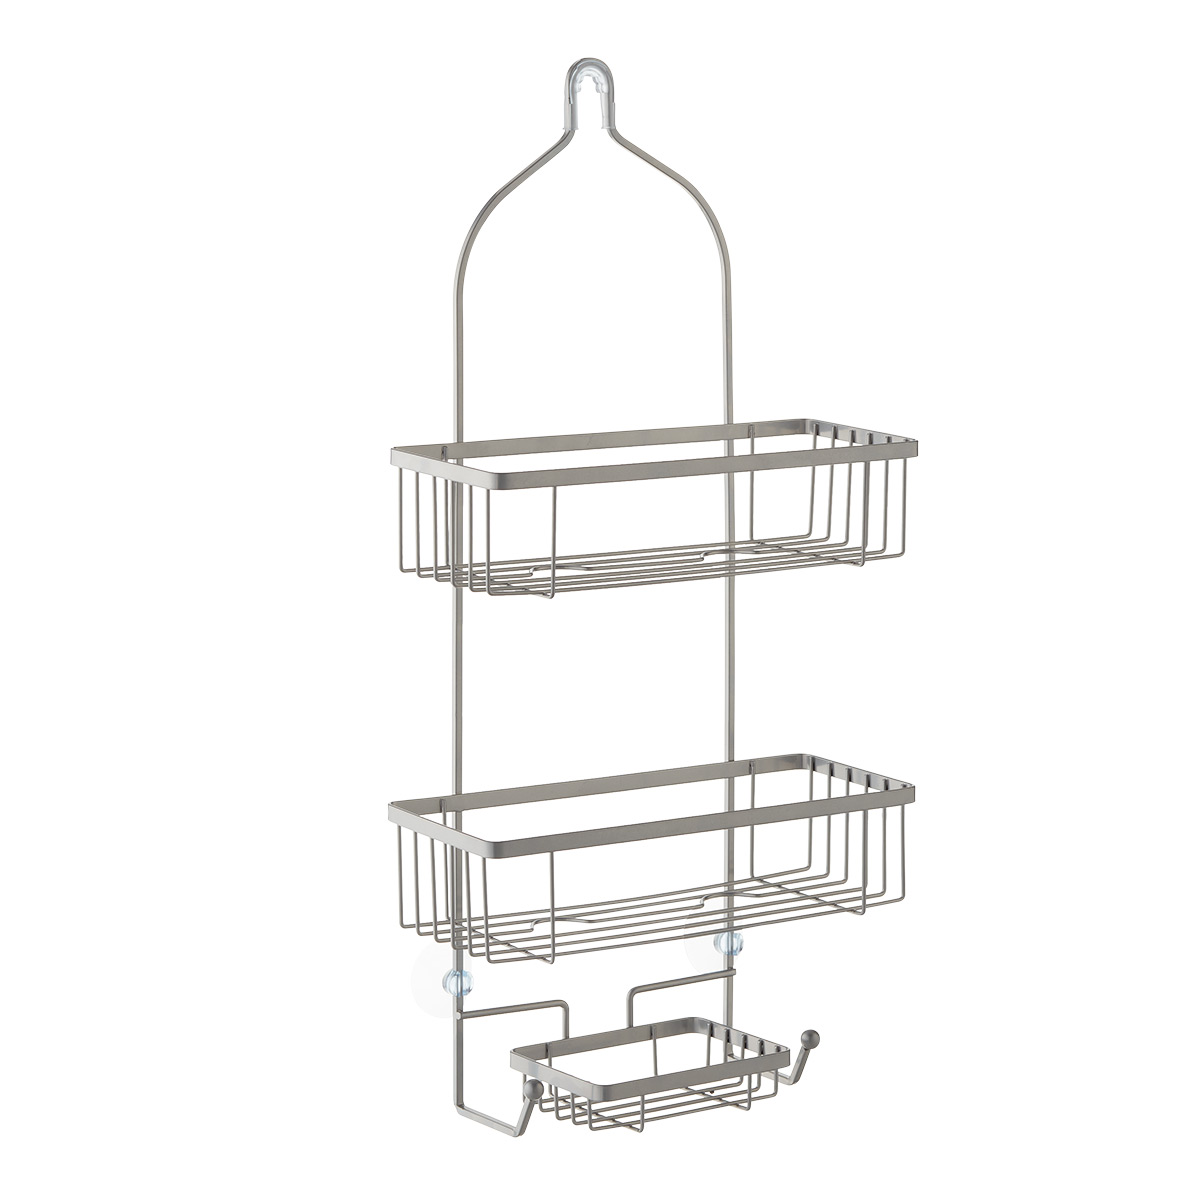 https://www.containerstore.com/catalogimages/444740/10088400_Troy_Shower_Caddy_Silver_V3.jpg